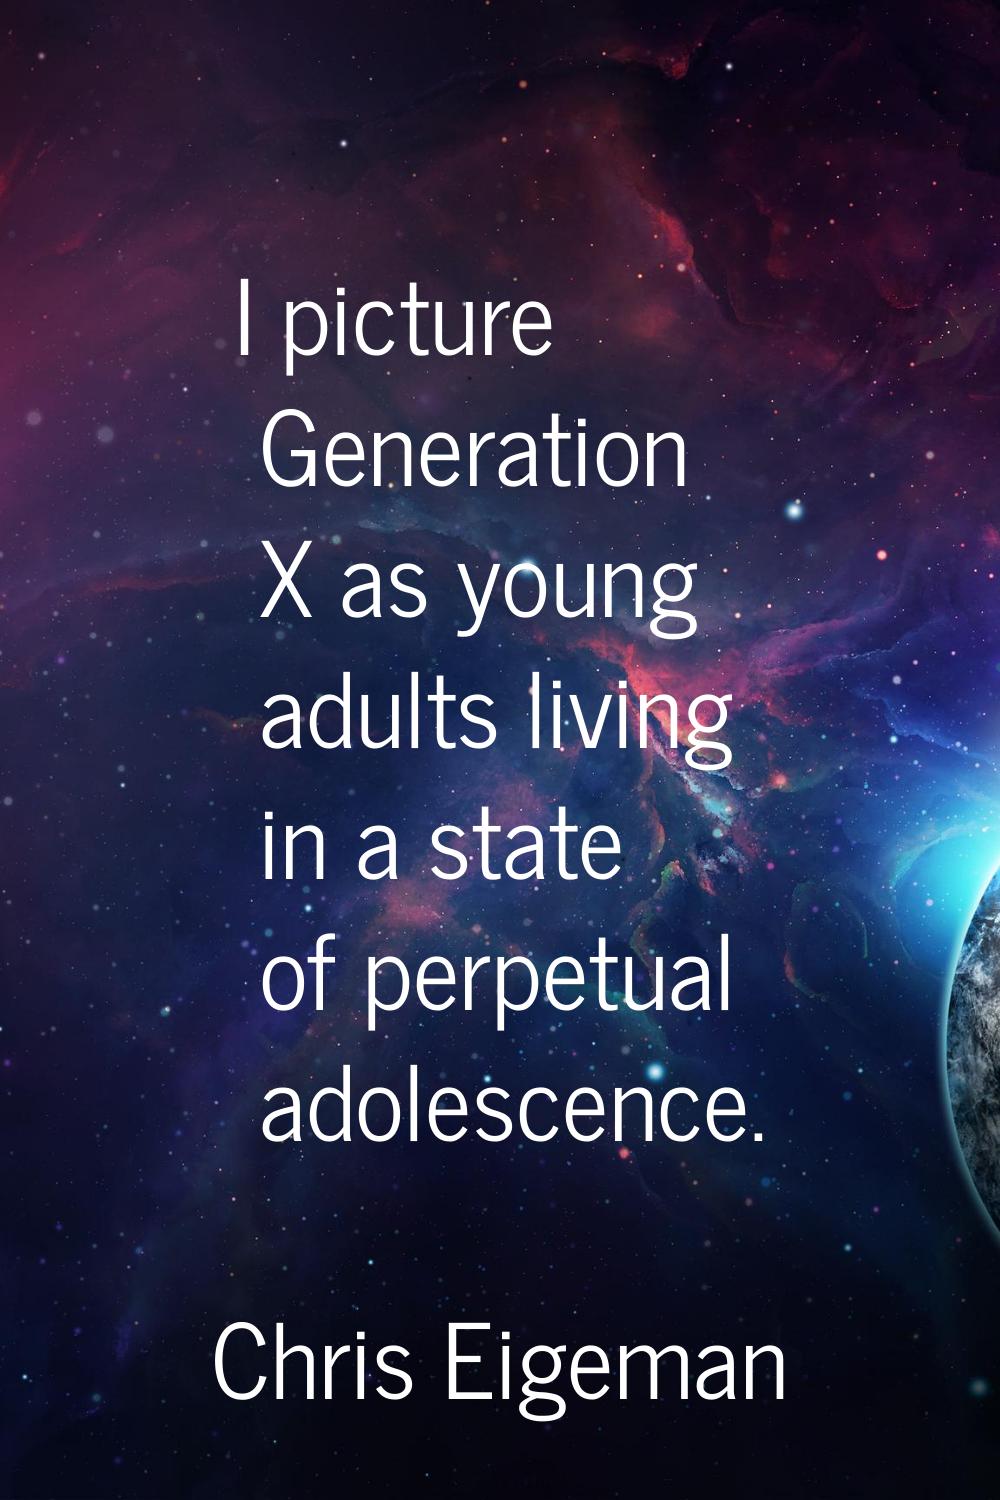 I picture Generation X as young adults living in a state of perpetual adolescence.